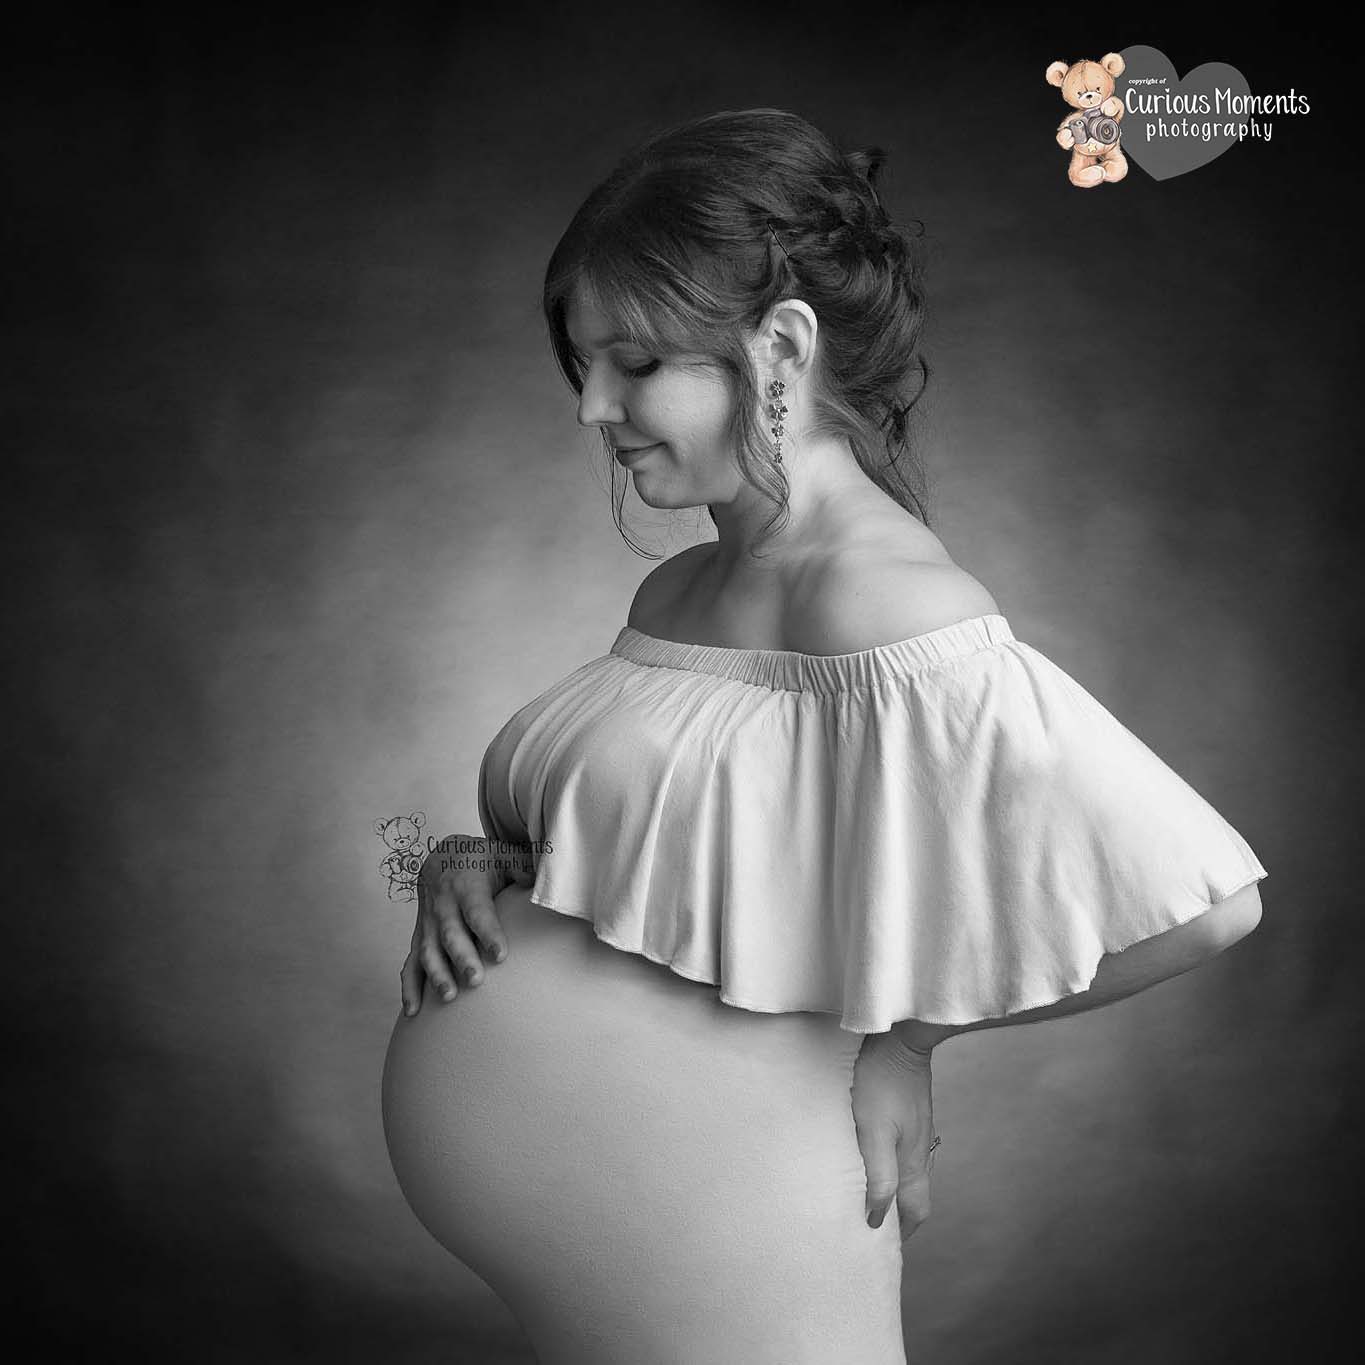 Last Trimester Of Pregnancy Pregnant mum-to0be